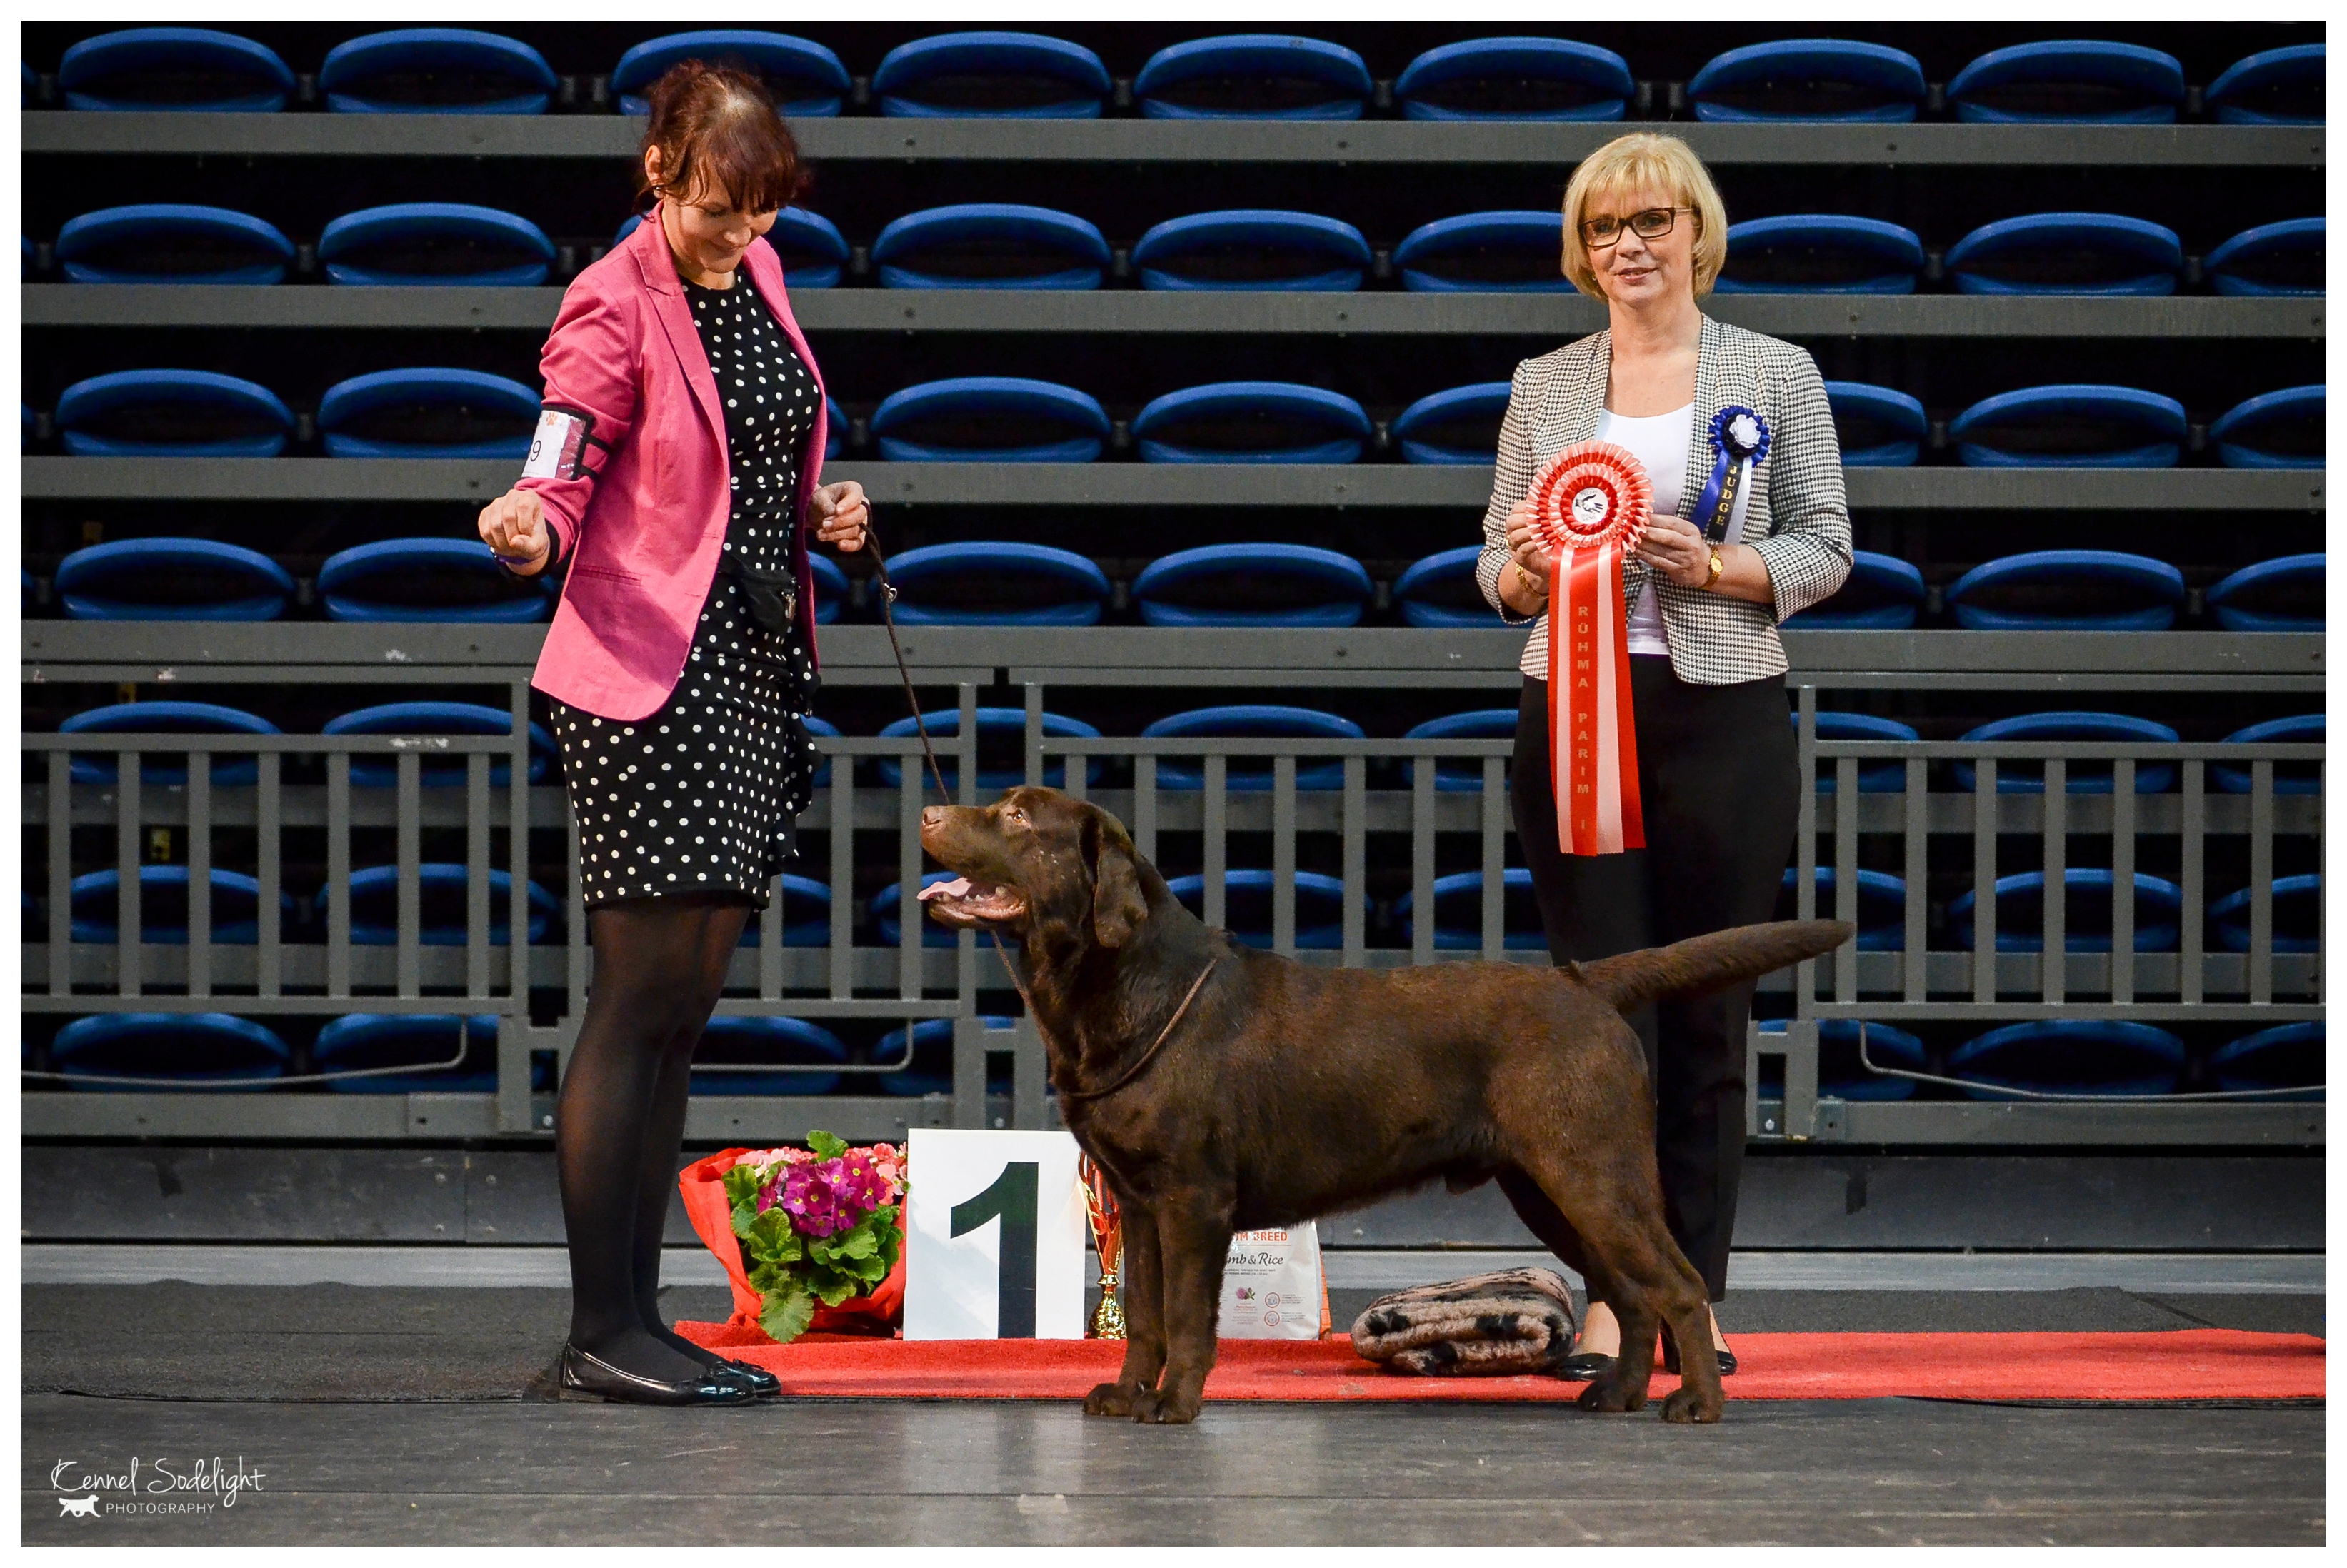 Lucca winning Best in Group at the Tallinn National Dog Show 12.3.2017. Judge Dorota Witkowska from Poland. Photo by talented Sodelight Photography.